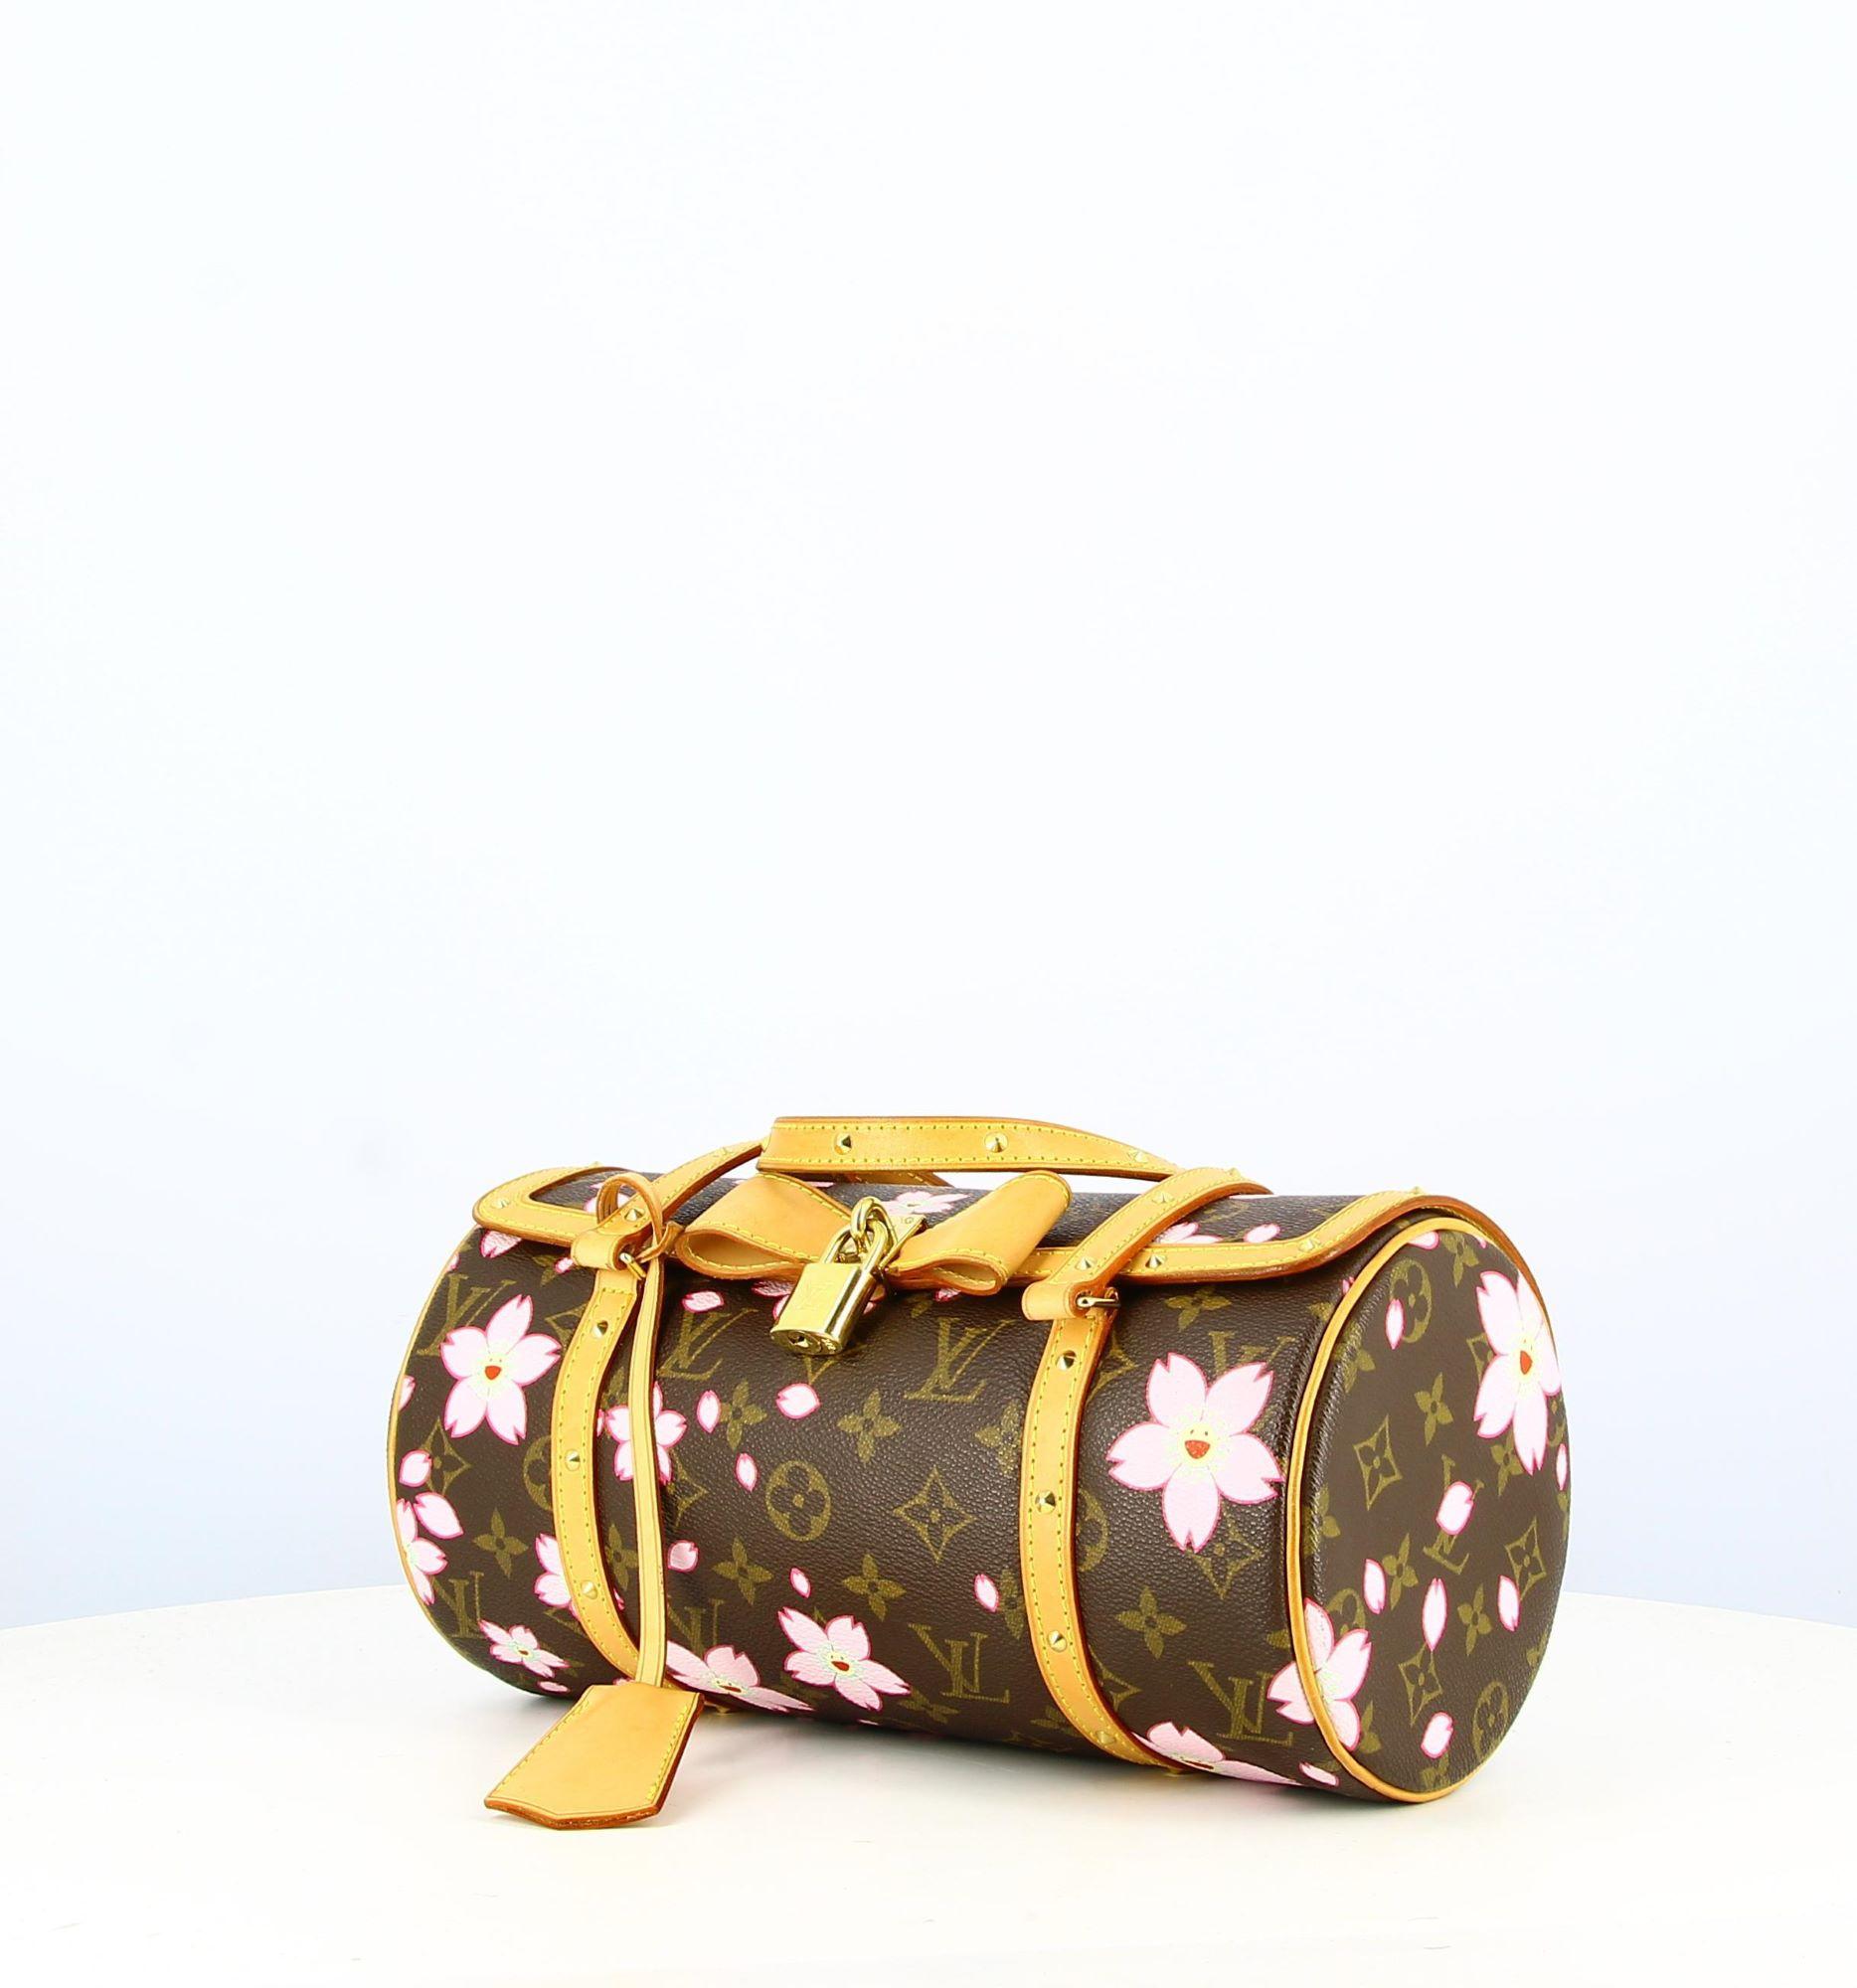 2002 Louis Vuitton X Takashi Morikami Monogram Butterfly Bag with Flowers
- Good condition, has slight traces of wear and tear with time.
- Butterfly handbag, monogram, flower motifs by Morikami, leather shoulder straps, leather bow tie in the